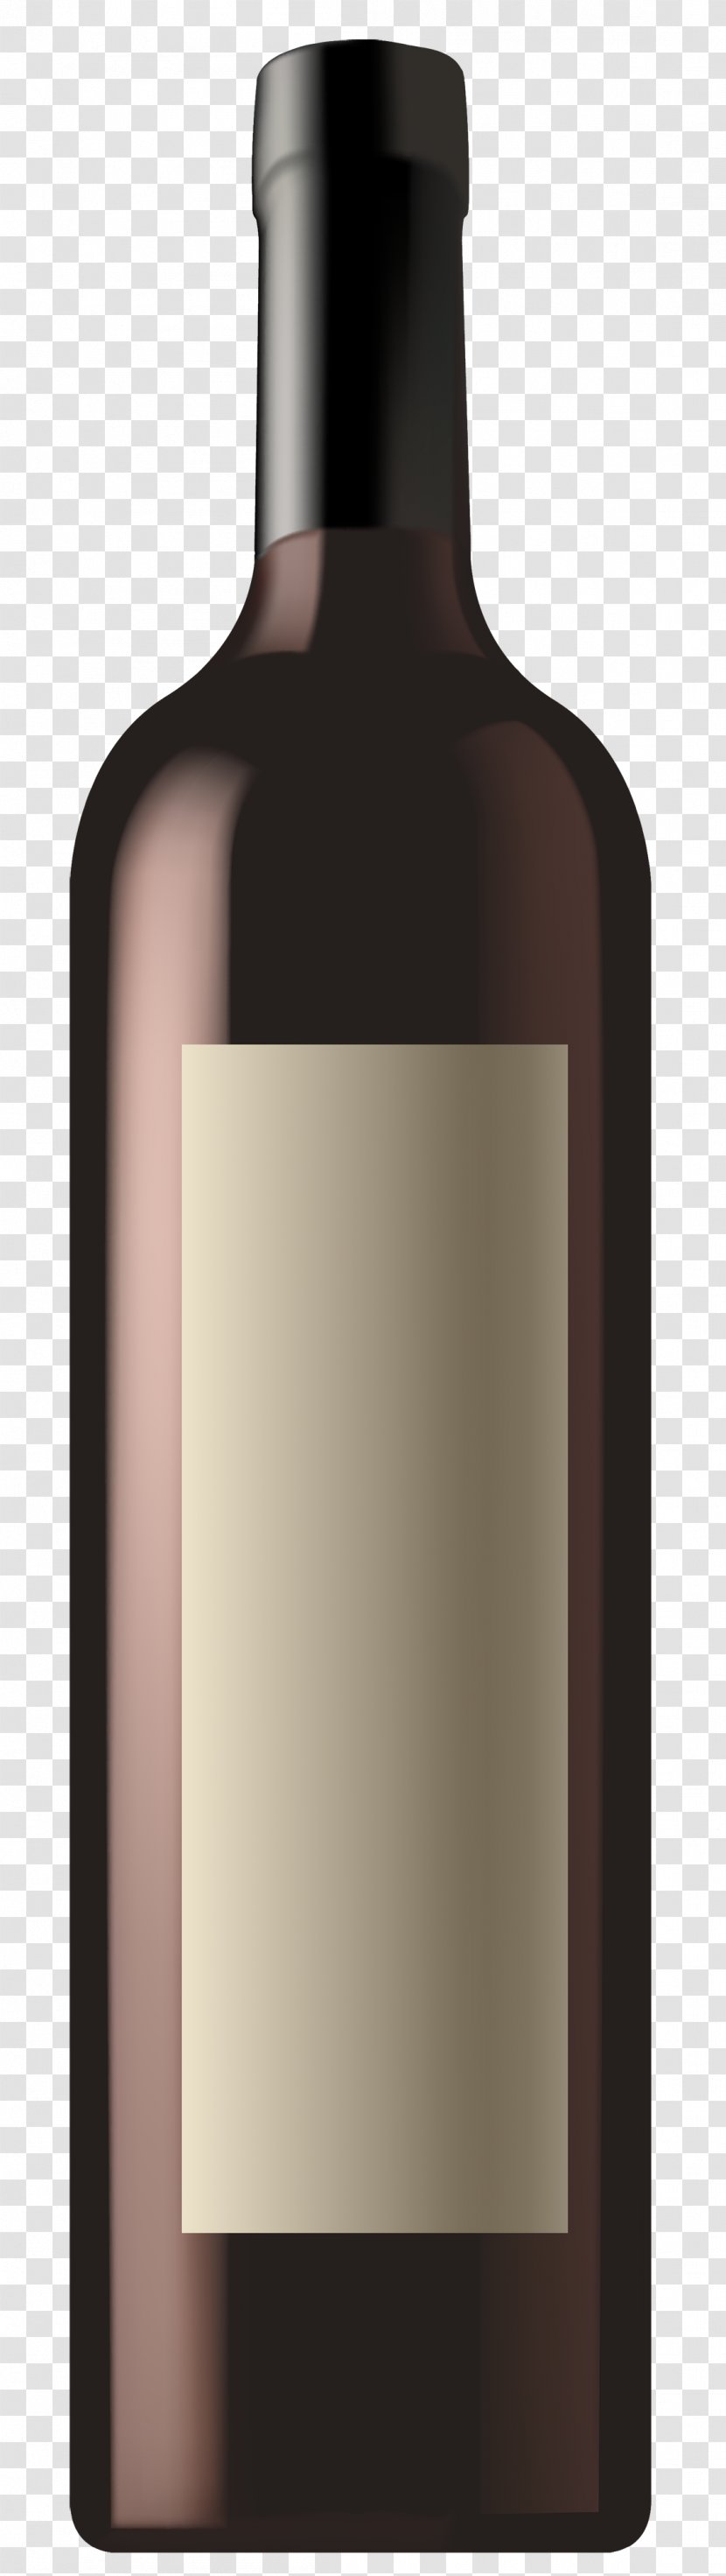 Red Wine White Bottle Clip Art - Drawing Transparent PNG